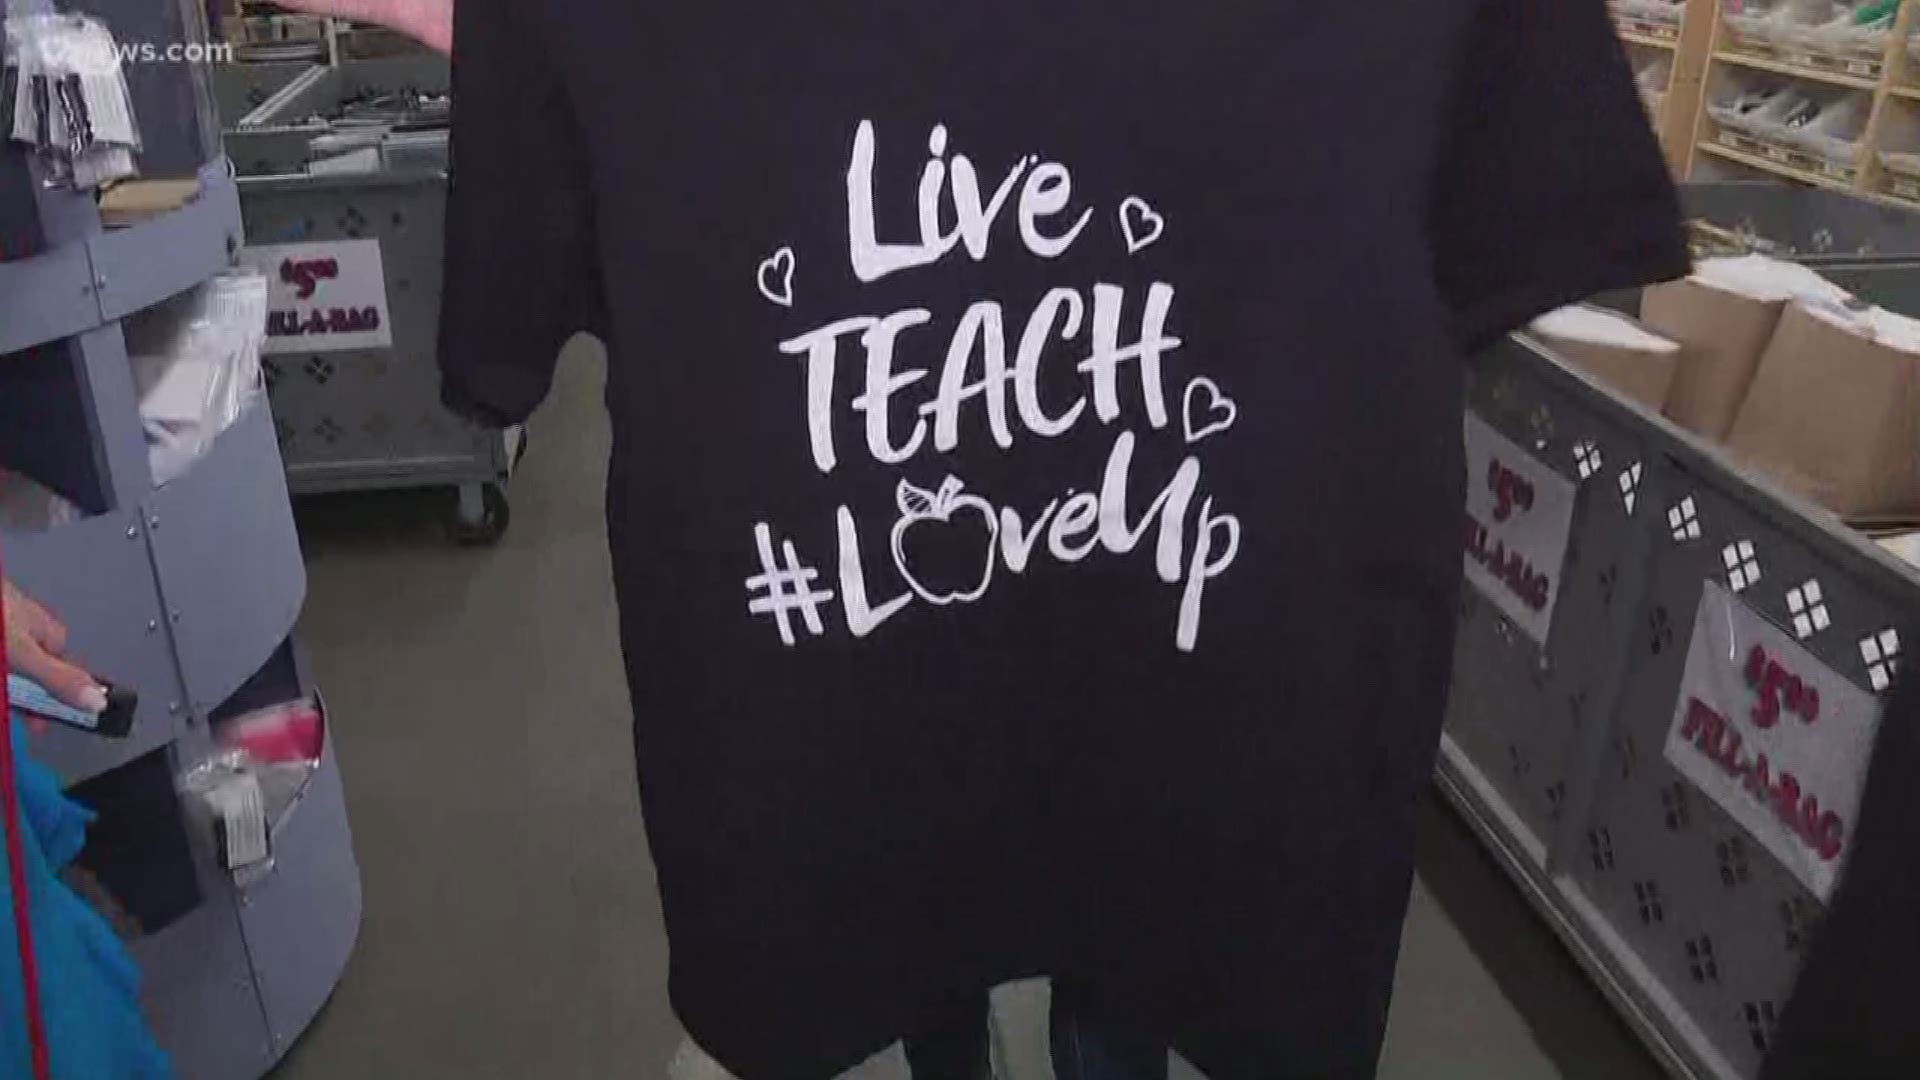 The #LoveUp movement spreads love and pays it forward, but also aims to serve the neediest kids in Arizona community even those in foster care.